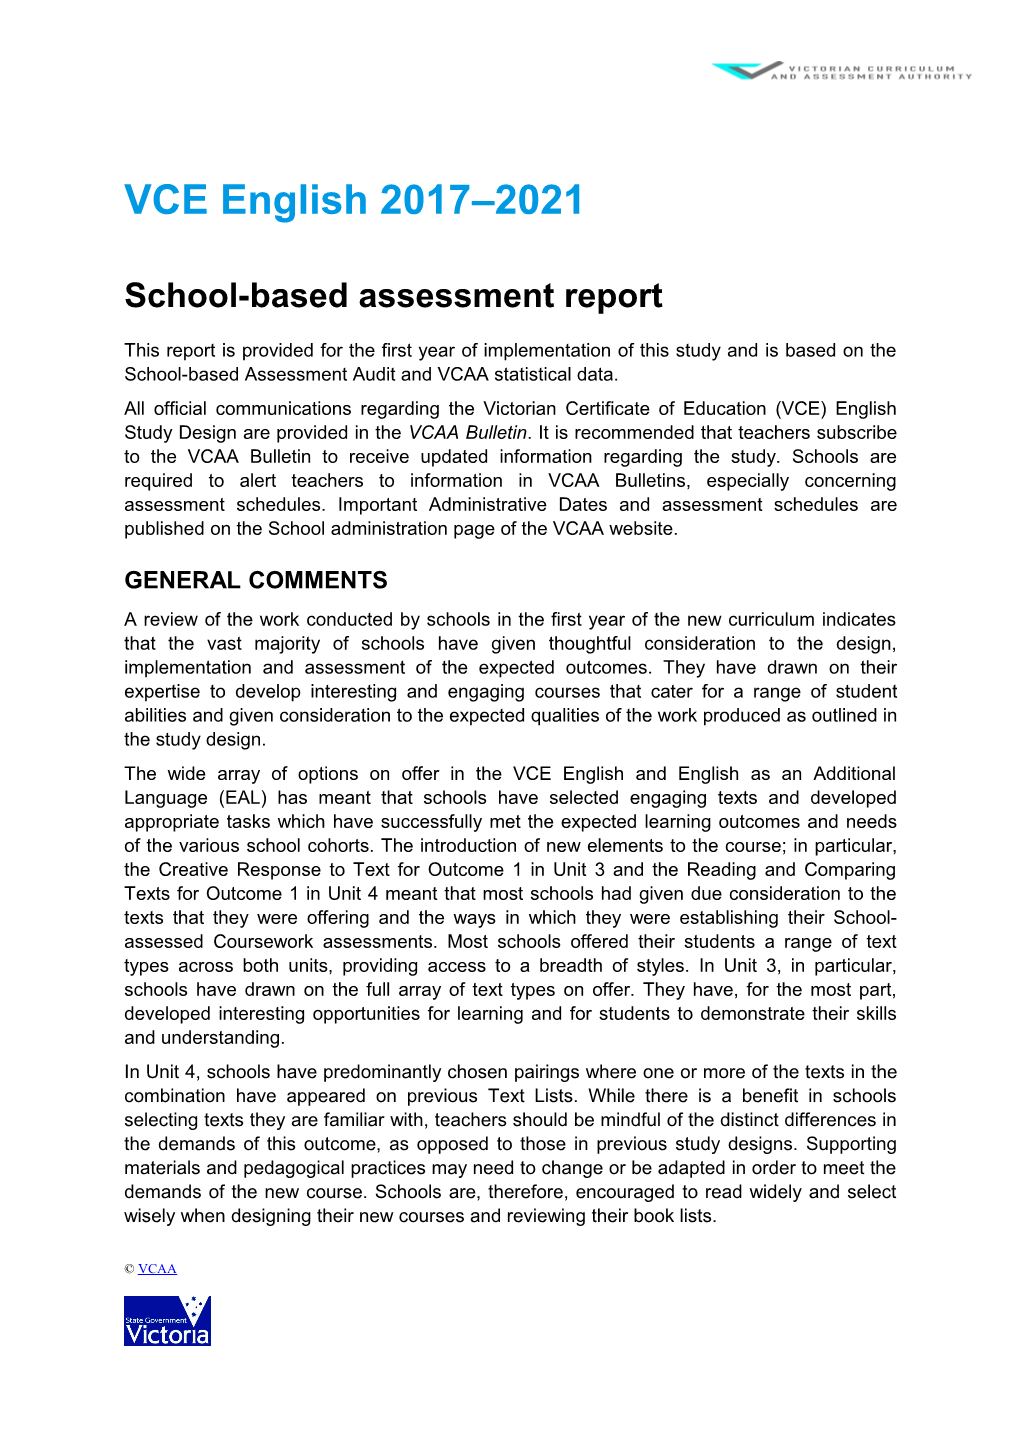 VCE English 2017 2021 School-Based Assessment Report